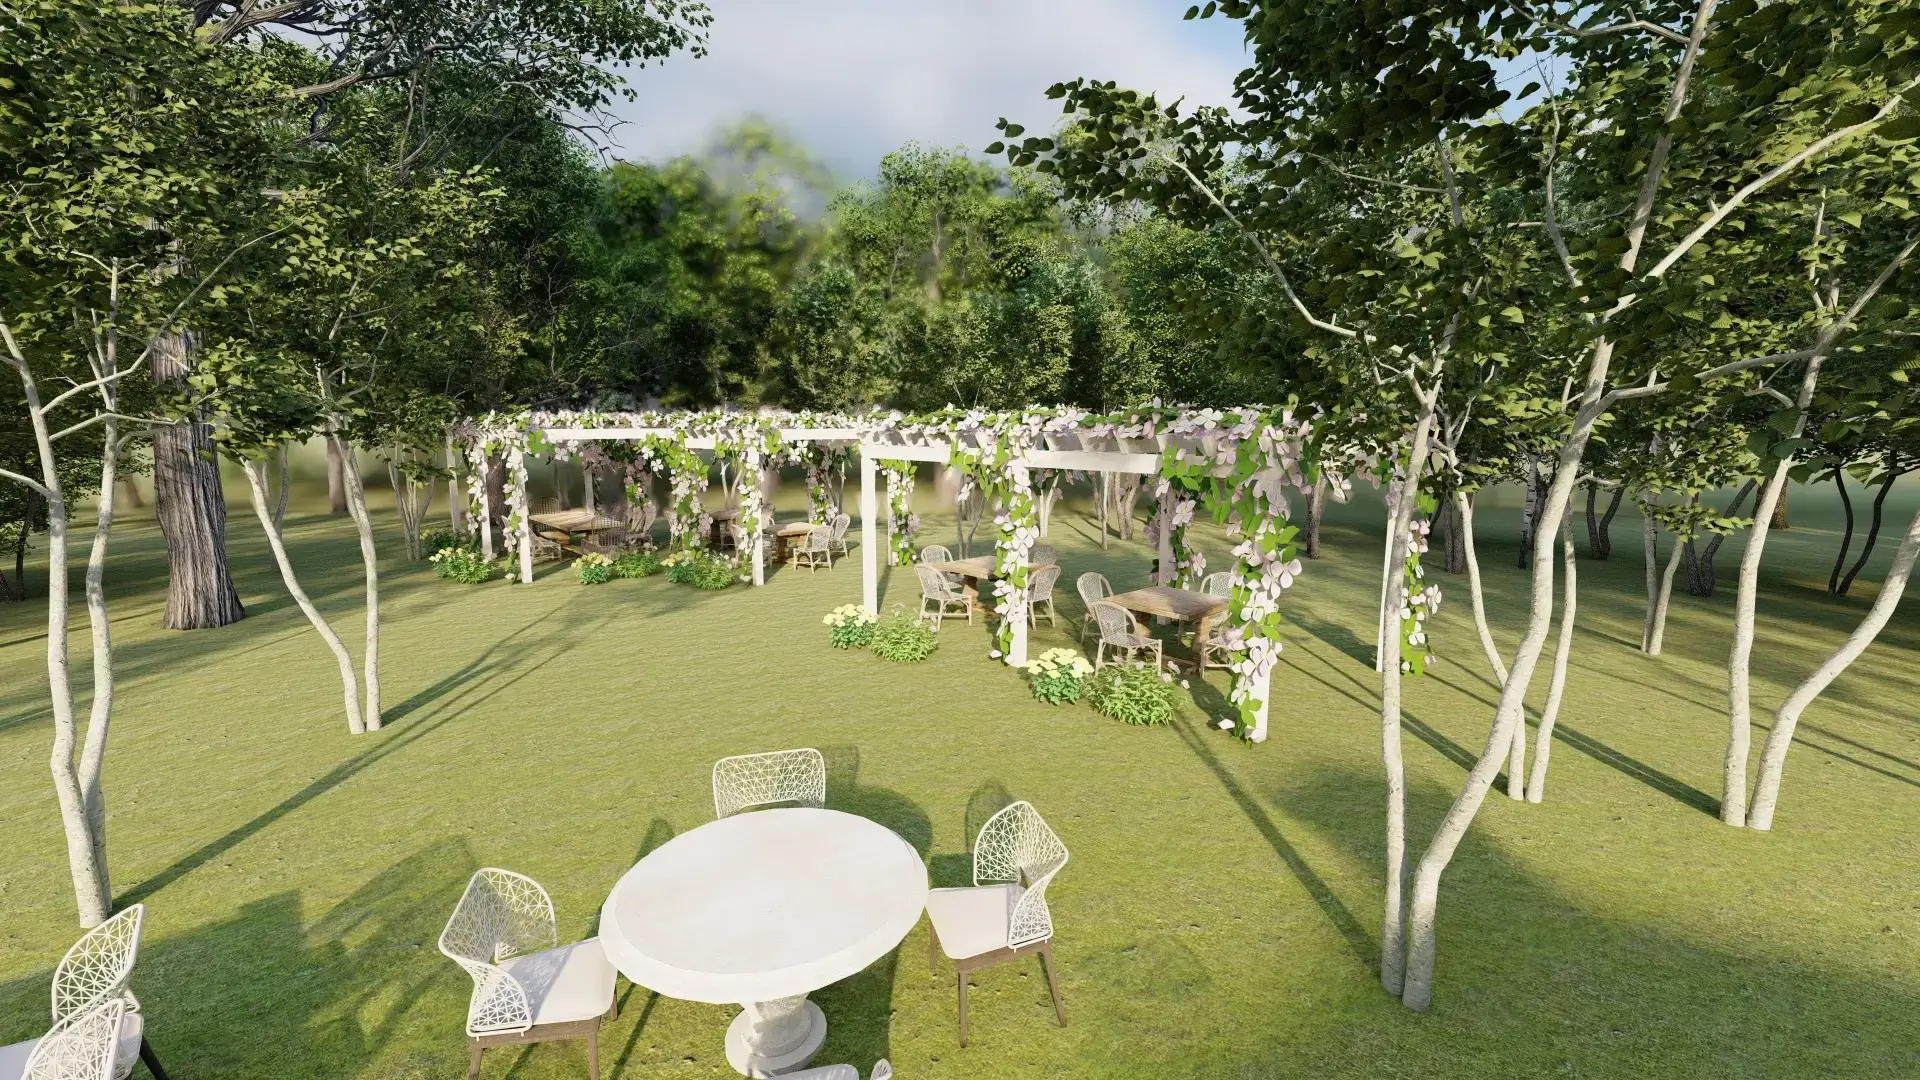 outdoor pergola with flowers and wooden chairs and tables on grass